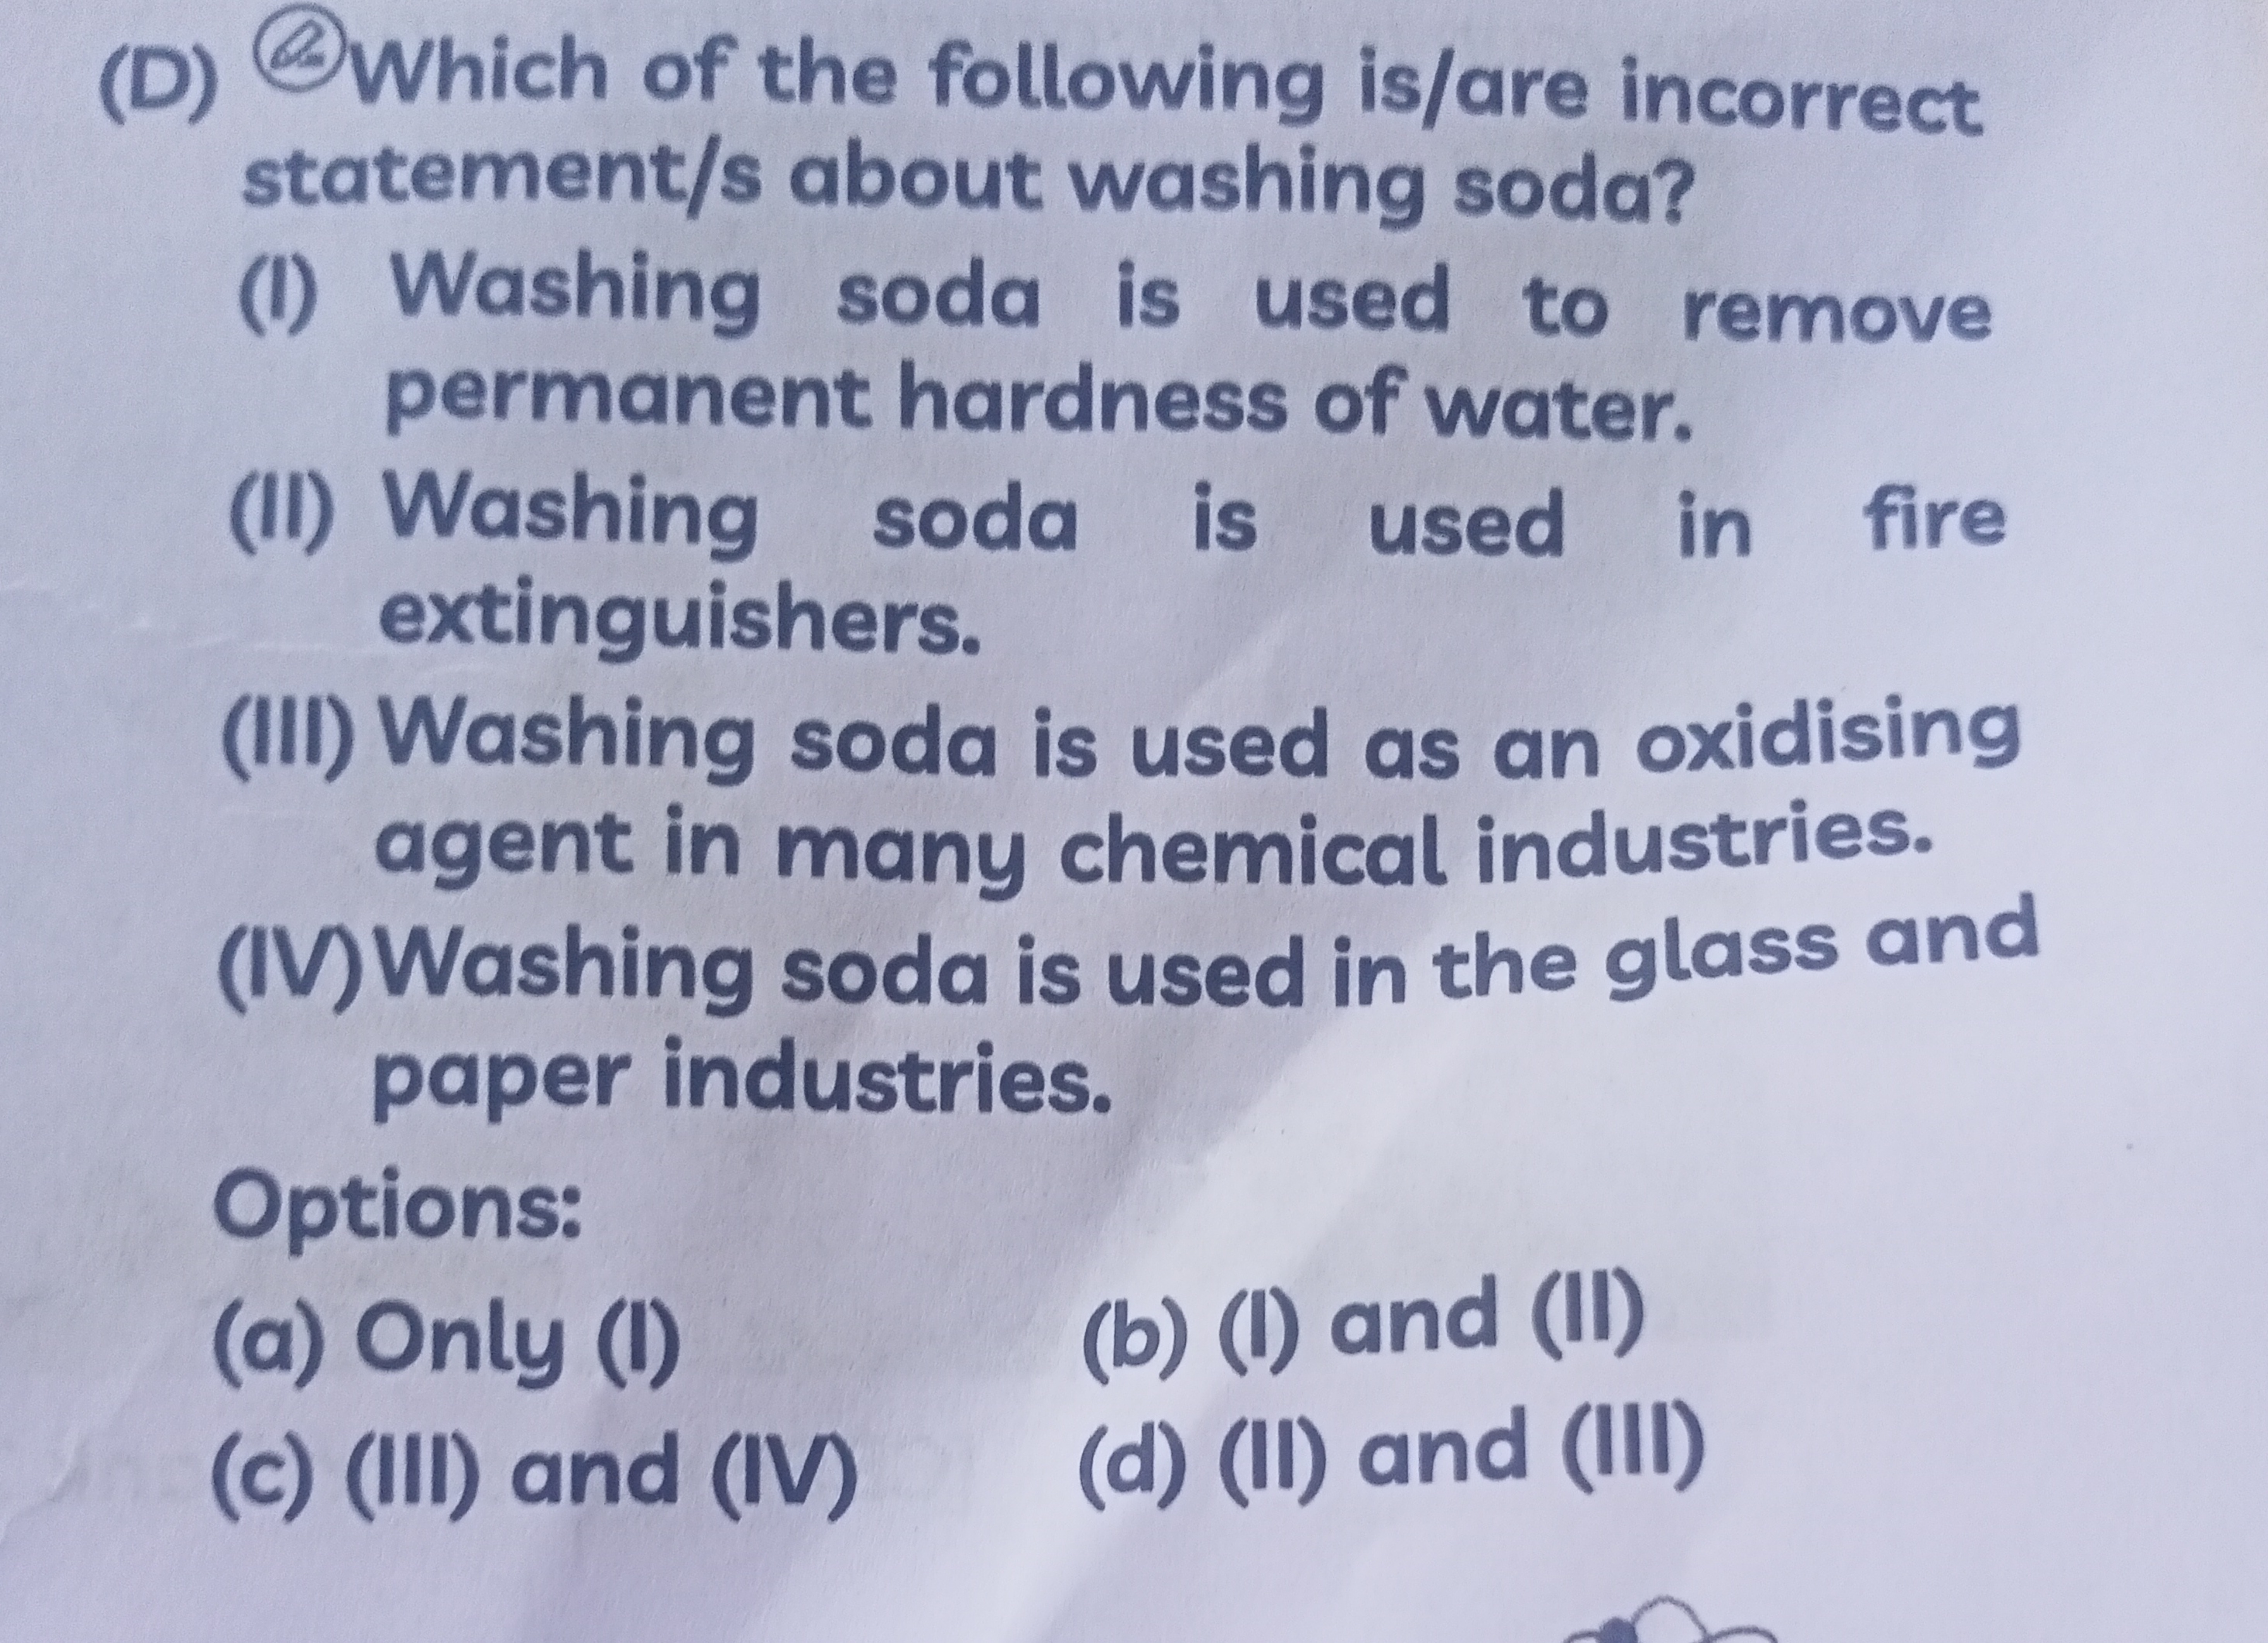  Washing soda is used to remove permanent hardness of water. (II) Wash